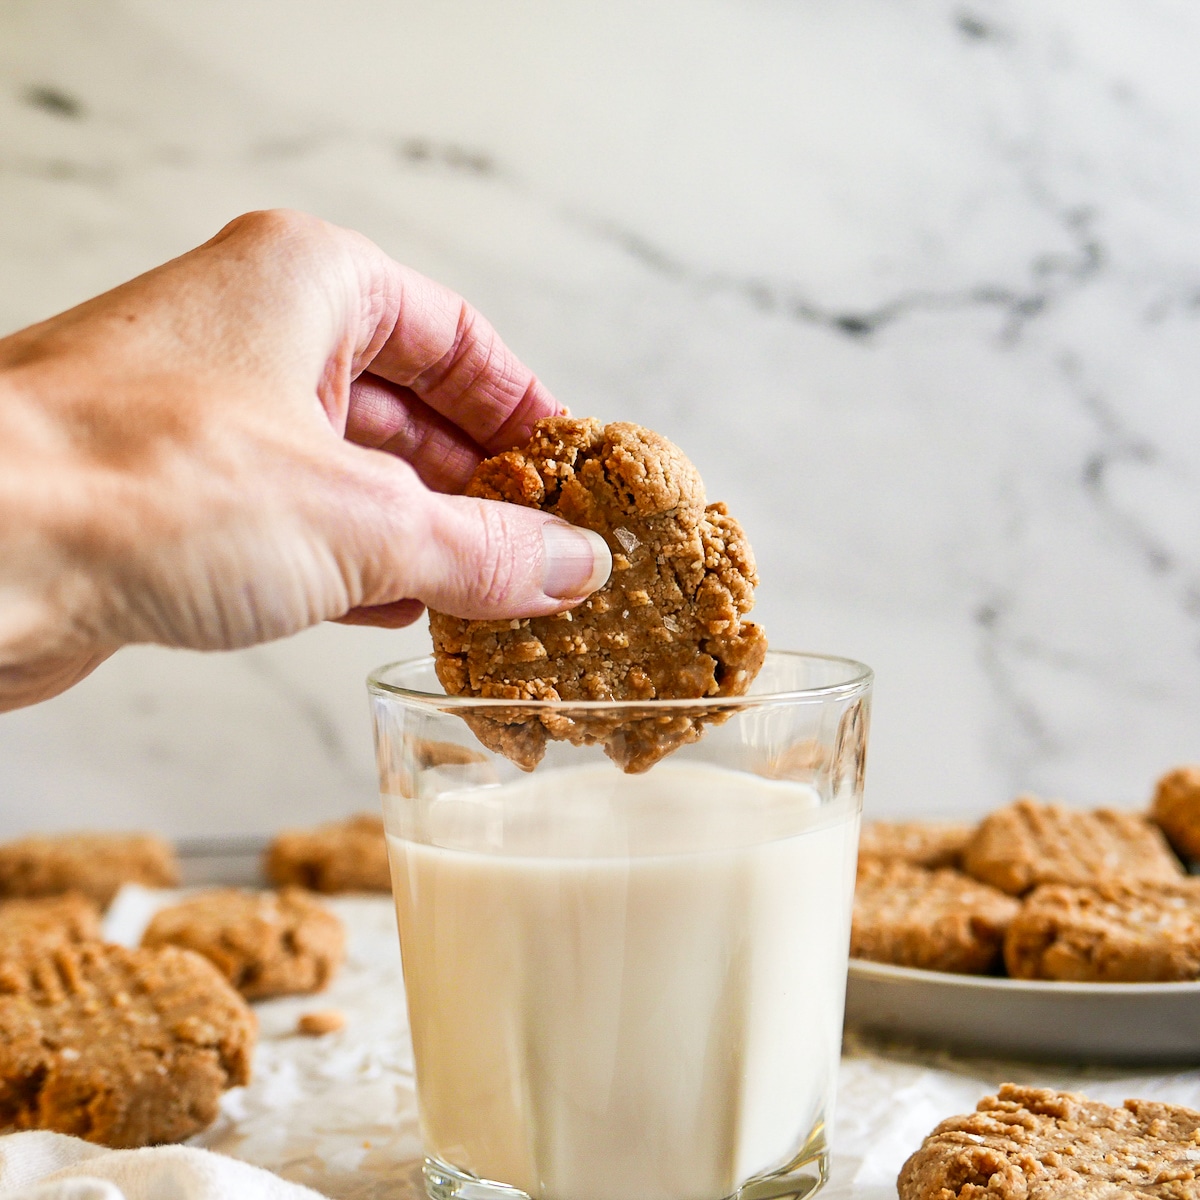 Hand dunking cookie into milk with a plate of cookies in background.